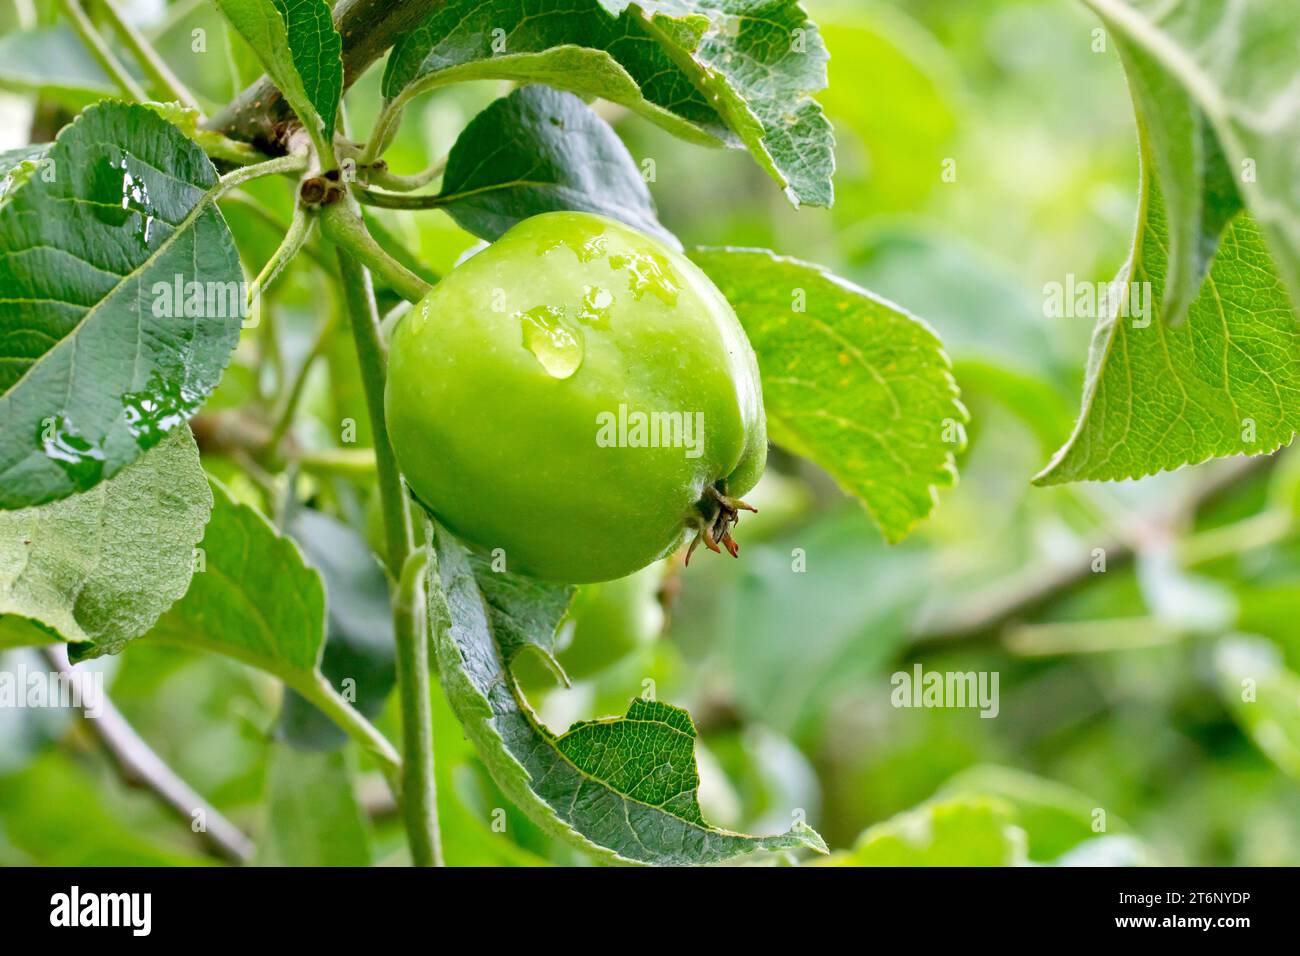 Crab Apple (malus sylvestris), close up of a solitary green apple hanging from a branch of a tree with a raindrop on its surface as it starts to rain. Stock Photo